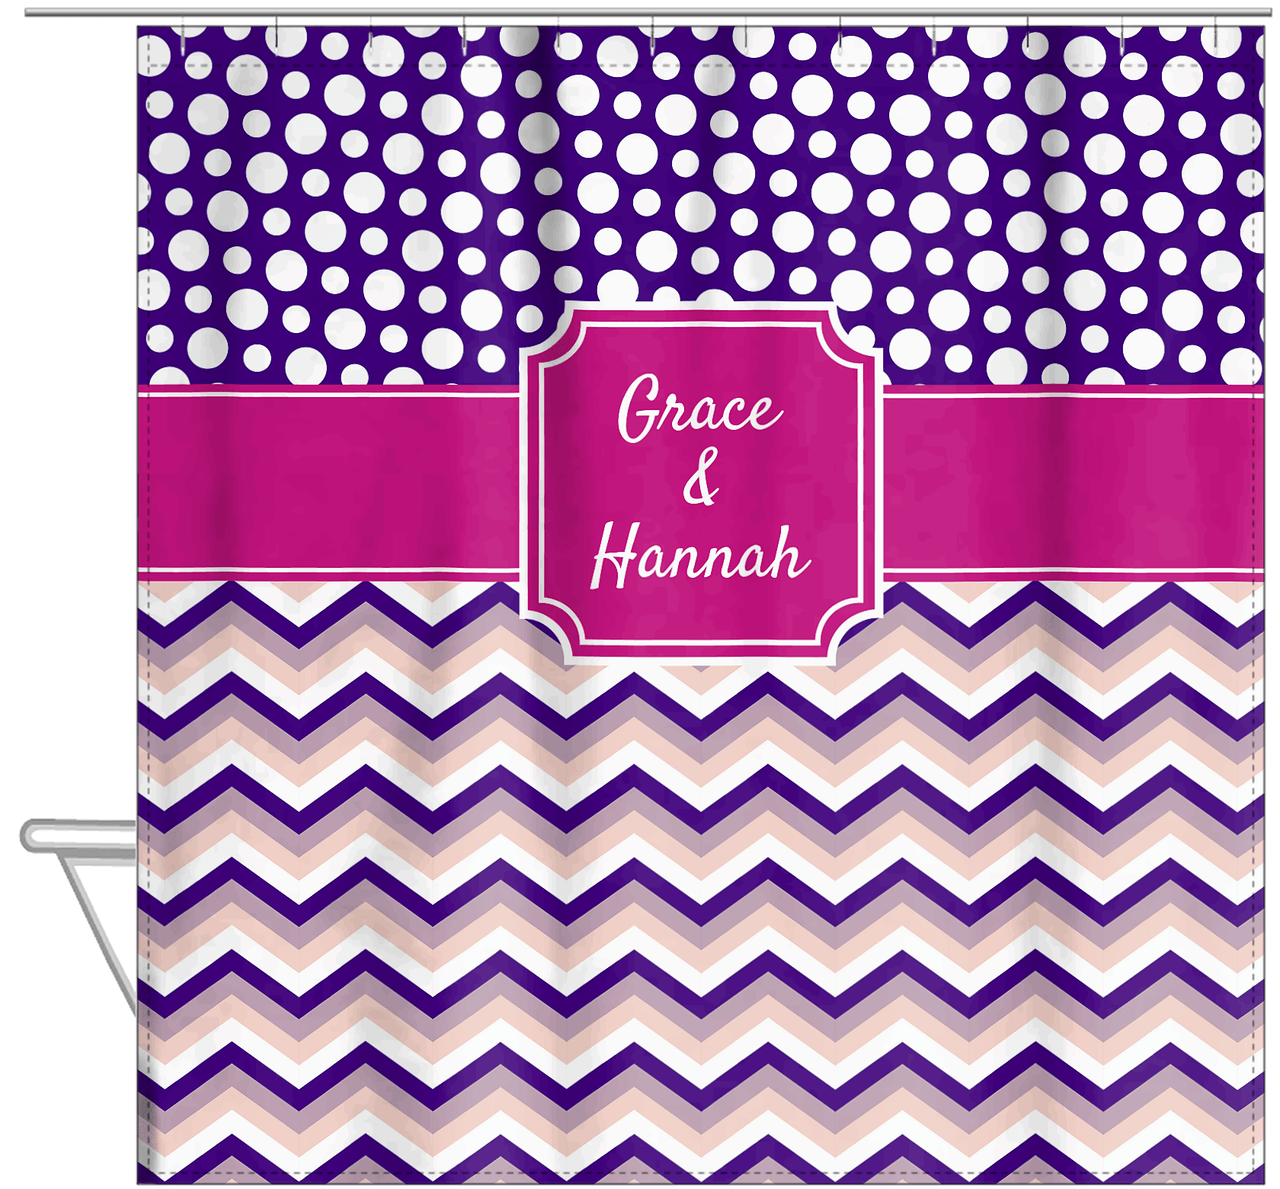 Personalized Polka Dots and Chevron IV Shower Curtain - Pink and Purple - Stamp Nameplate - Hanging View